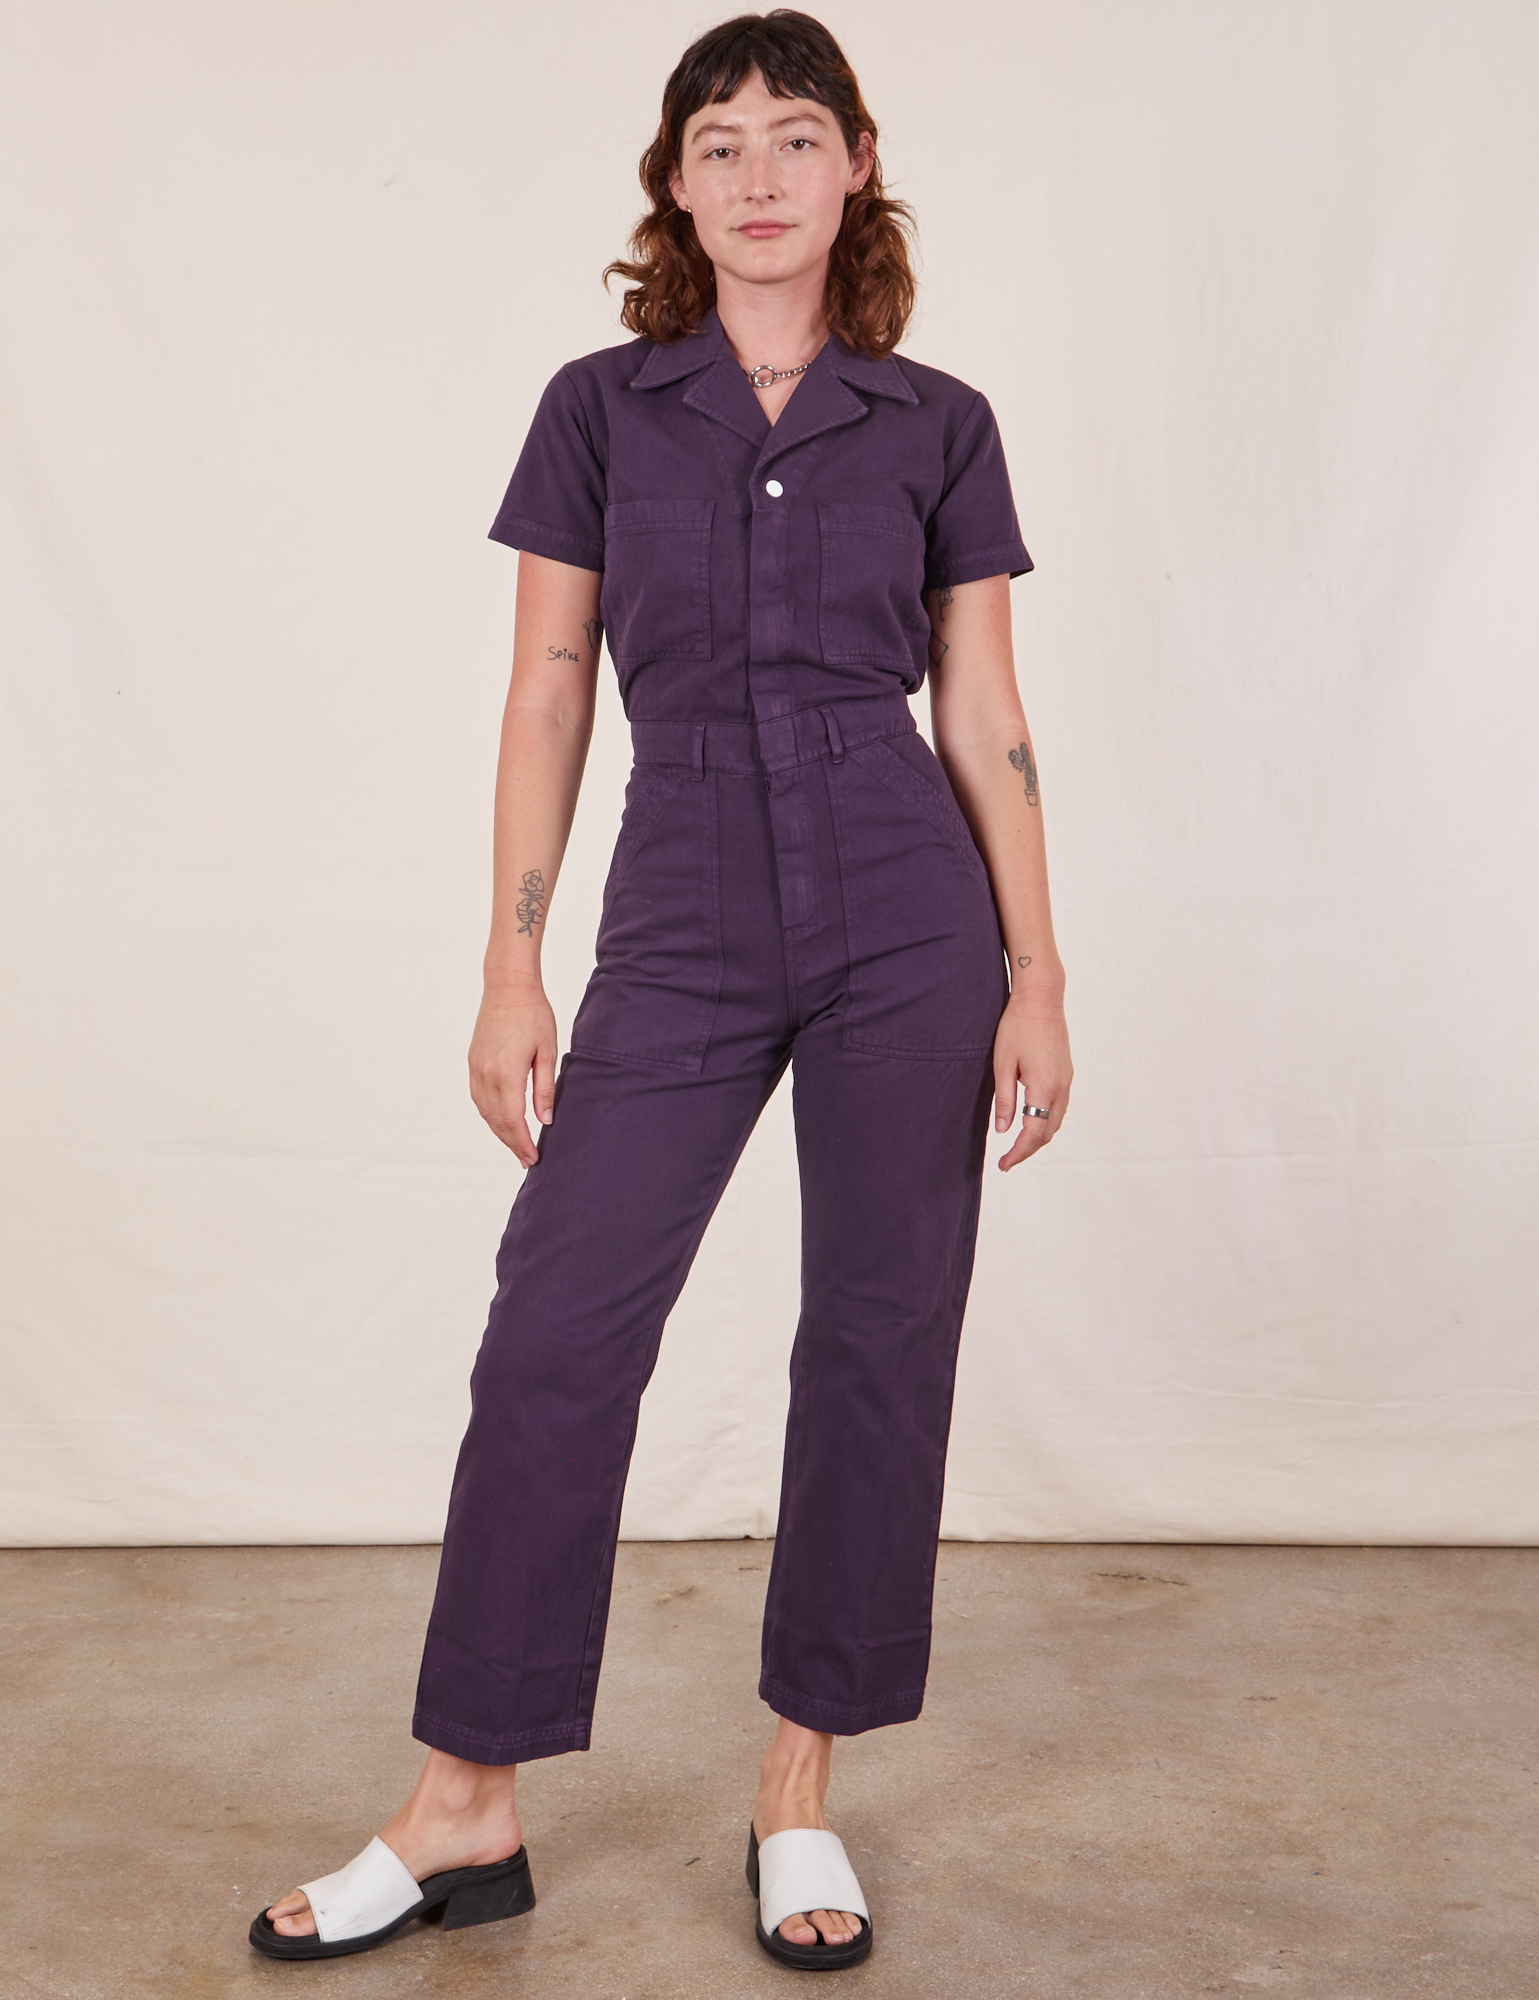 Alex is 5&#39;8&quot; and wearing XS Short Sleeve Jumpsuit in Nebula Purple